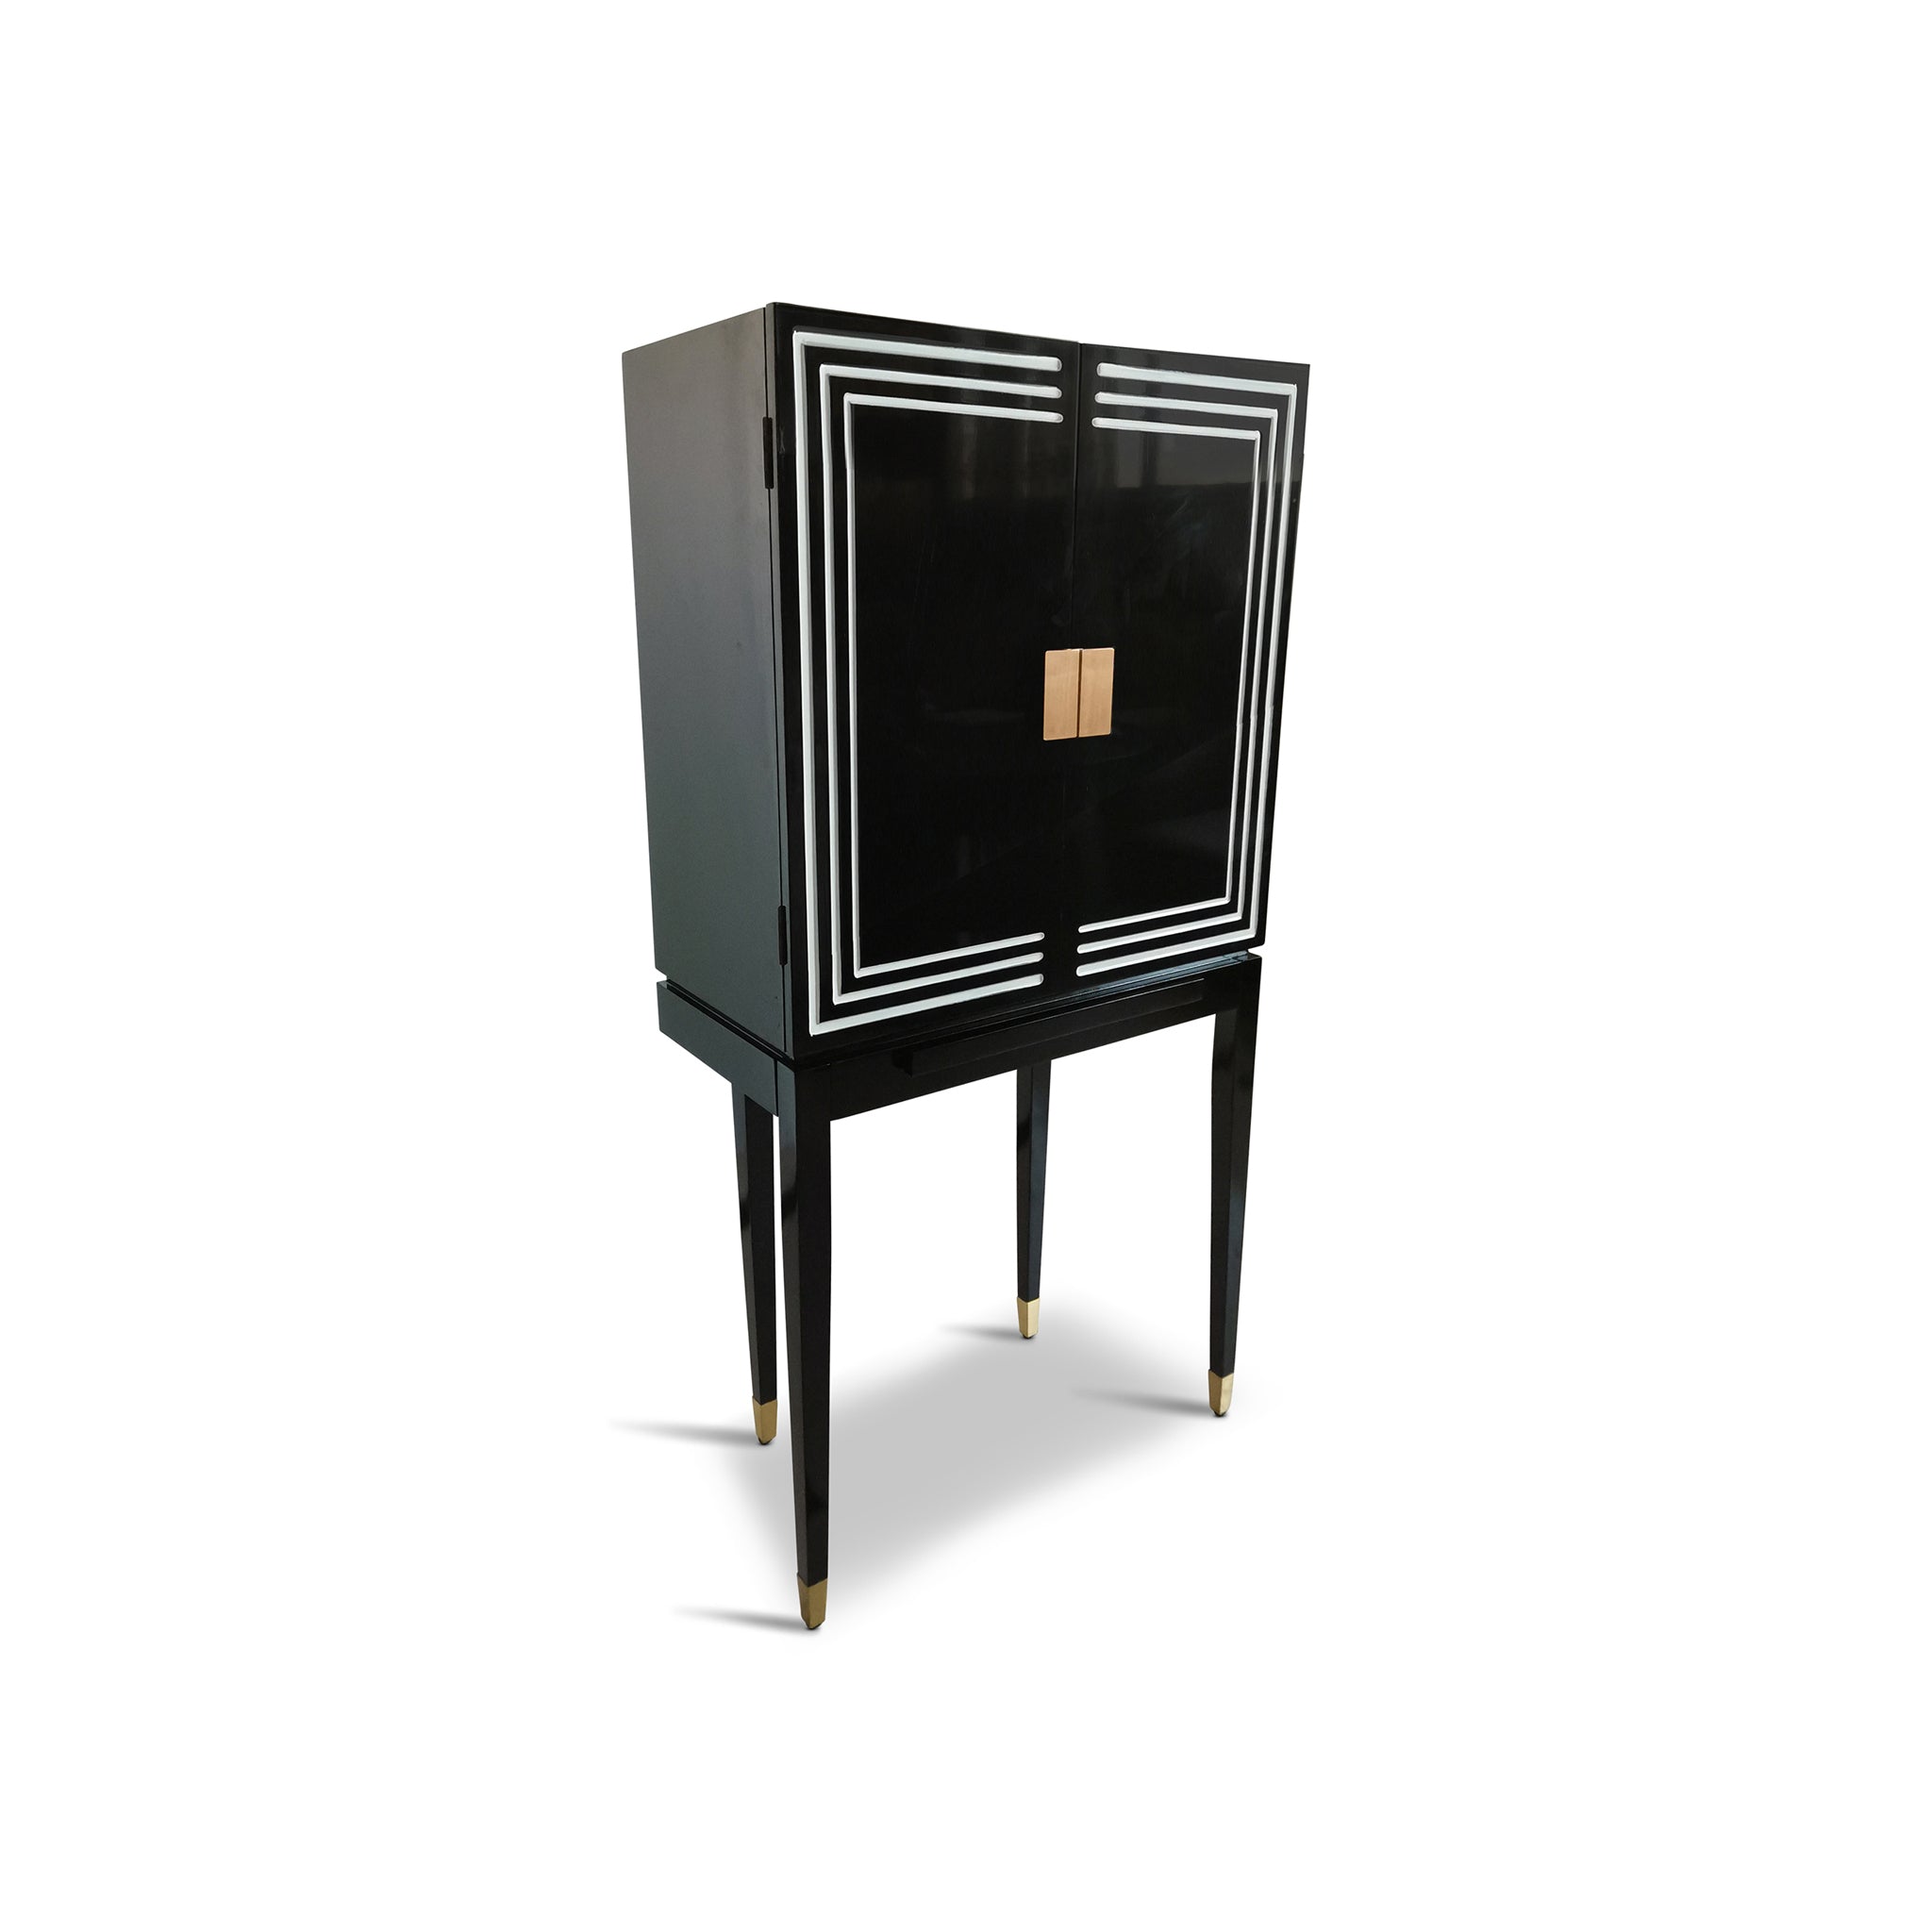 The Curator's Black Bar Cabinet